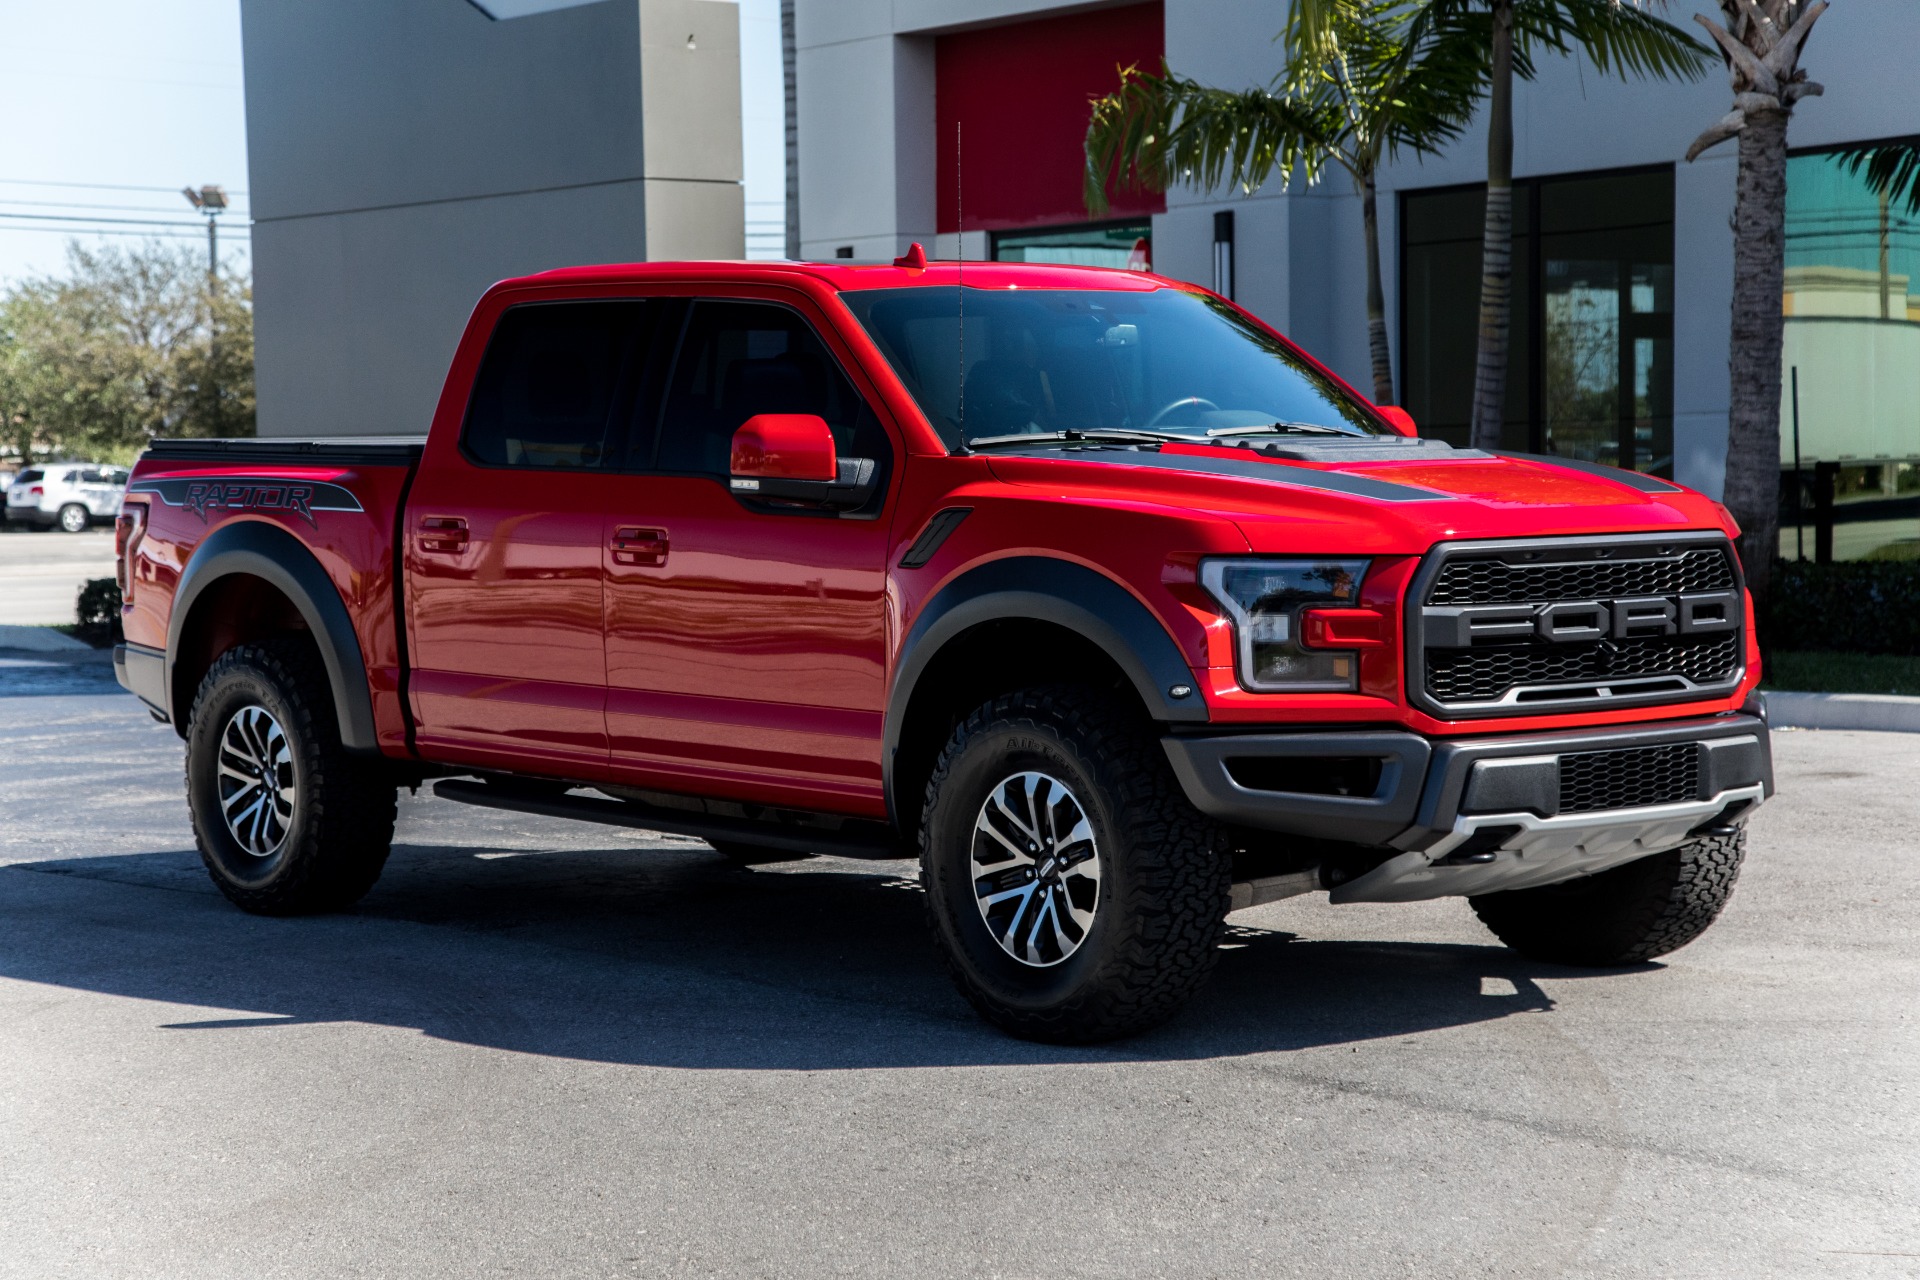 Used 2019 Ford F-150 Raptor For Sale ($66,900) | Marino Performance ...